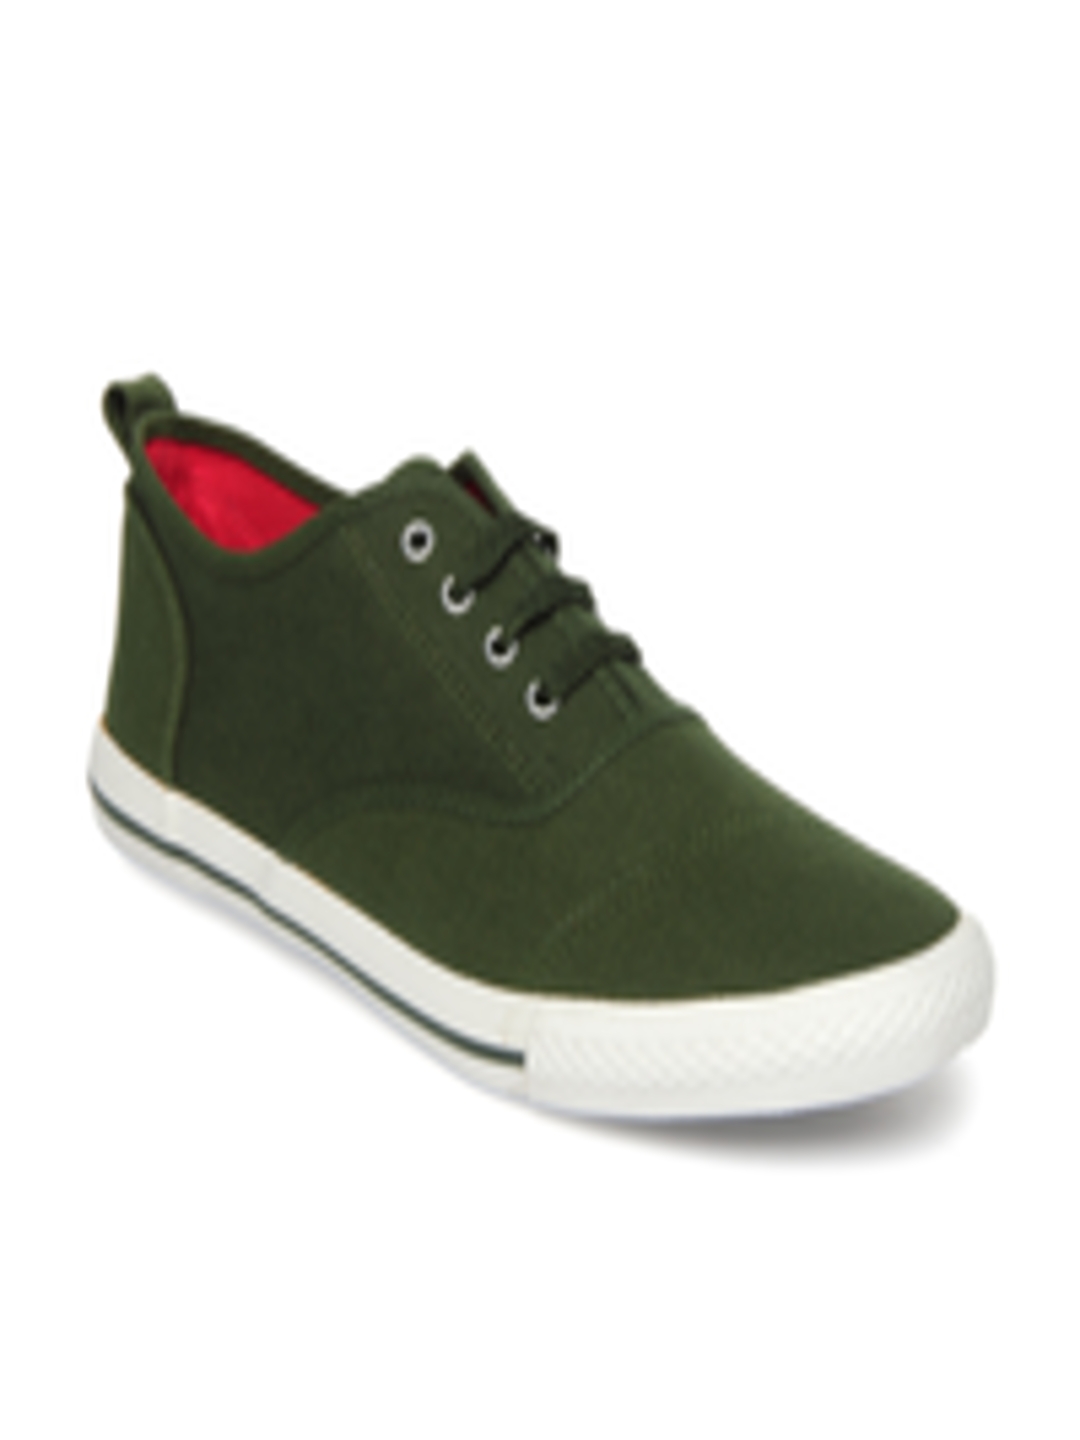 Buy Roadster Men Olive Green Casual Shoes Casual Shoes